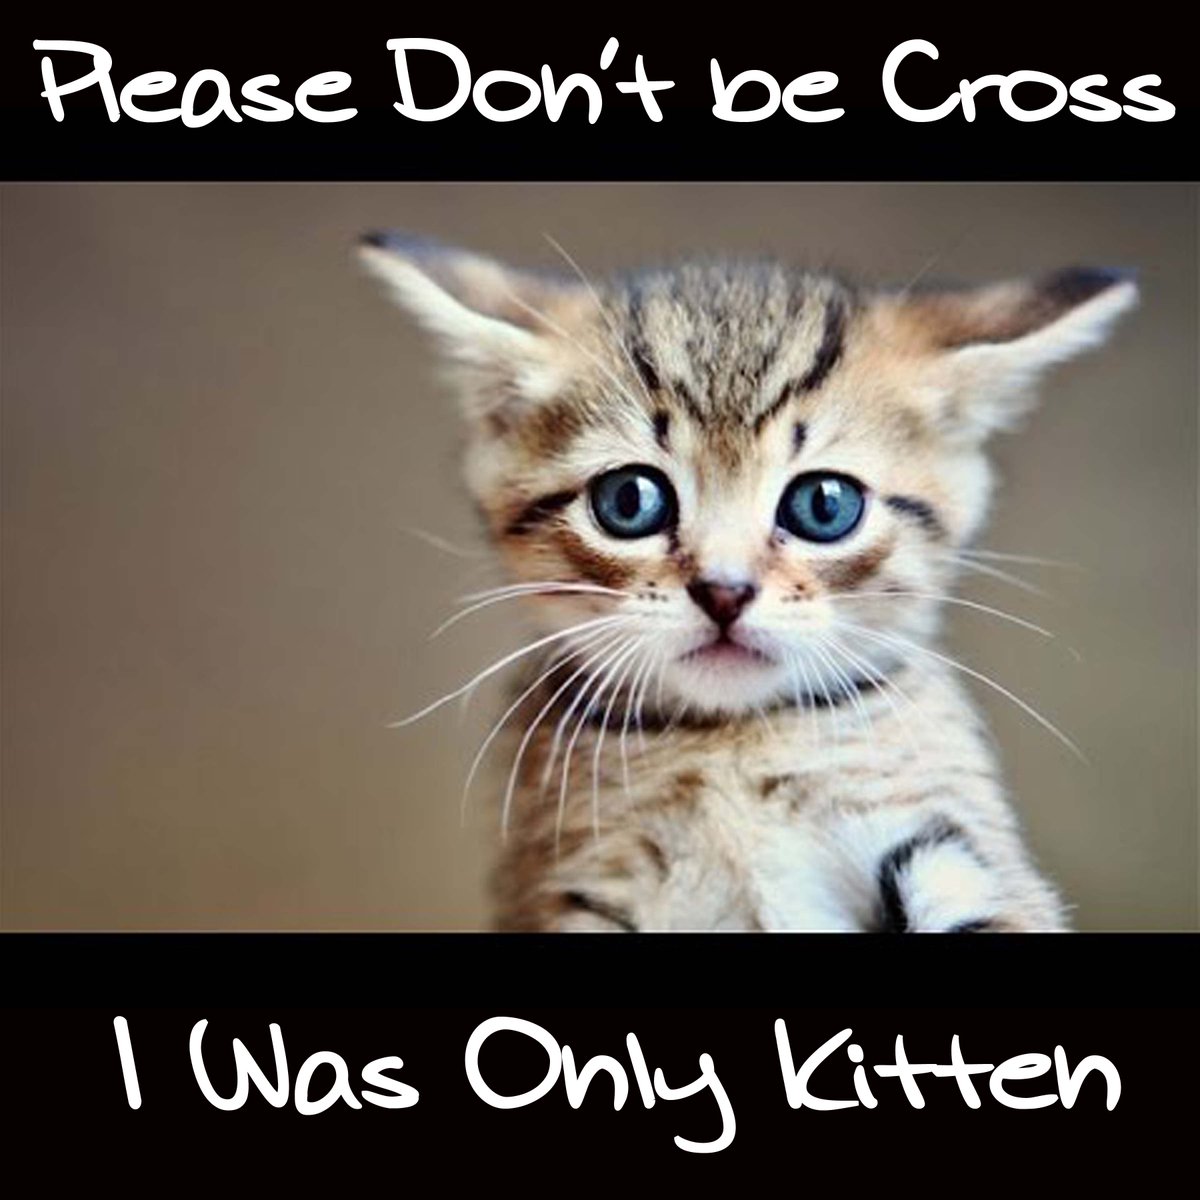 #funnycat Poster 10'x10' For when you need to say you were only #kitten. the-vip-emporium.com/collections/fu…